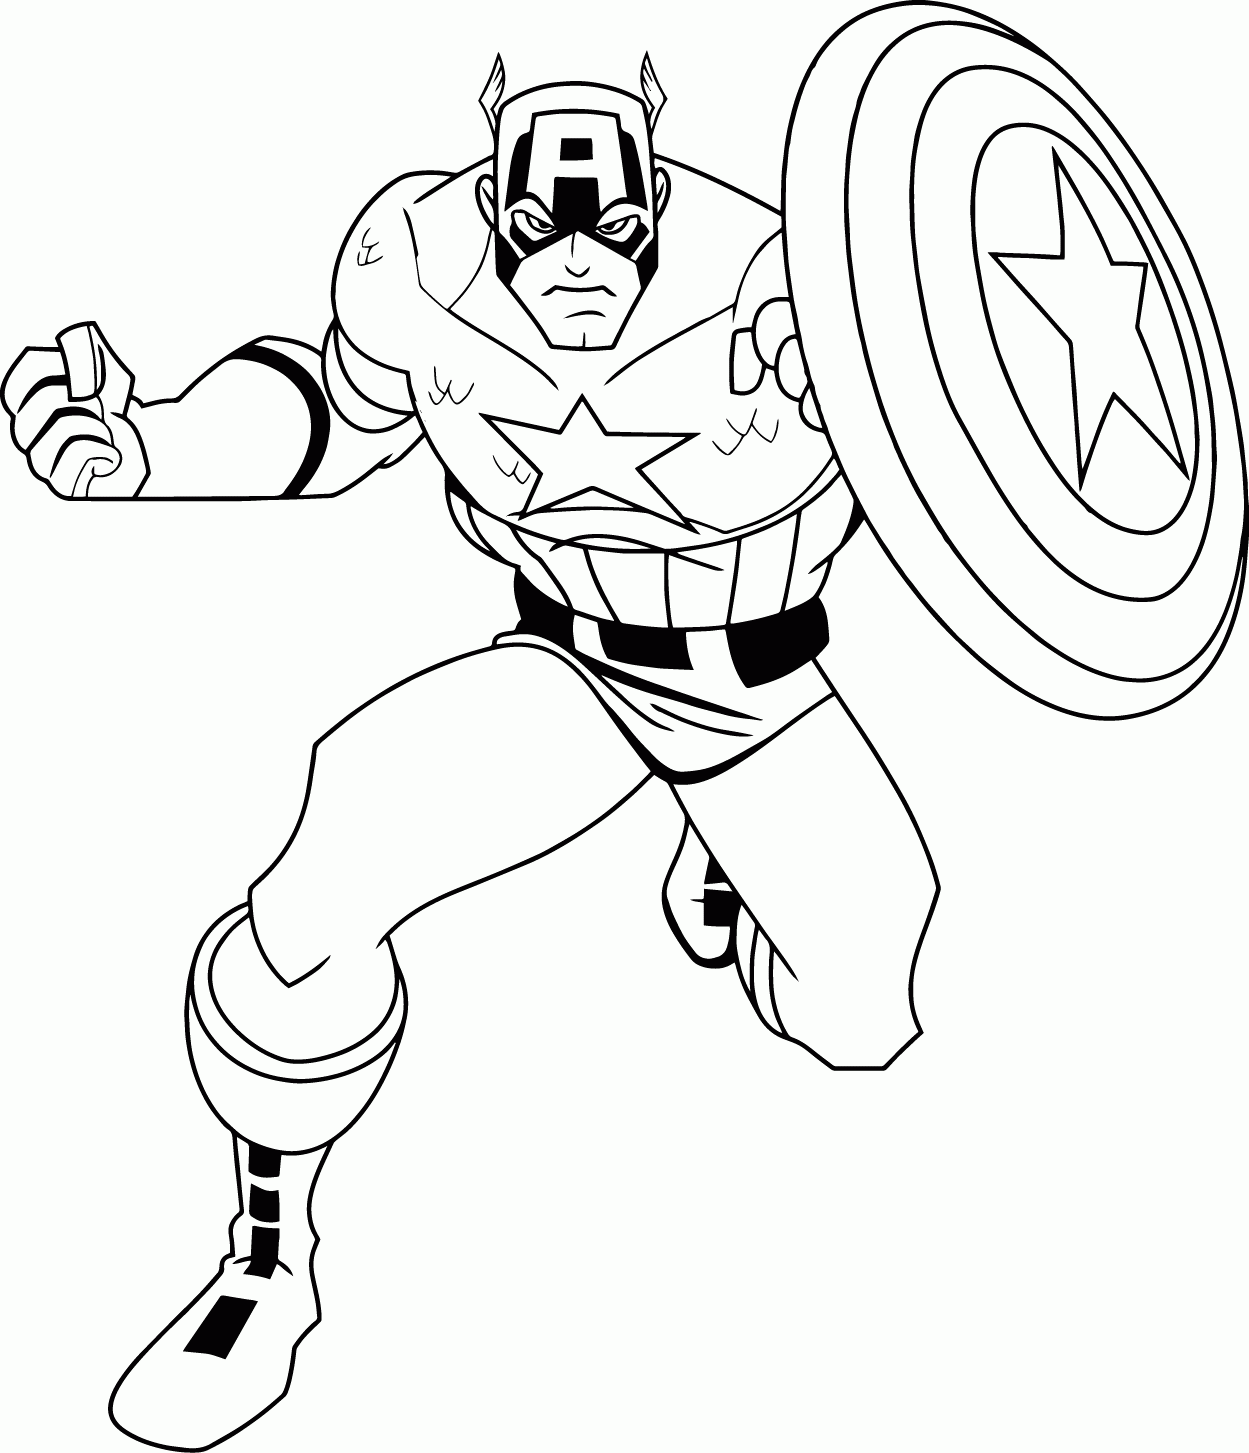 Captain America Coloring Pages | Wecoloringpage